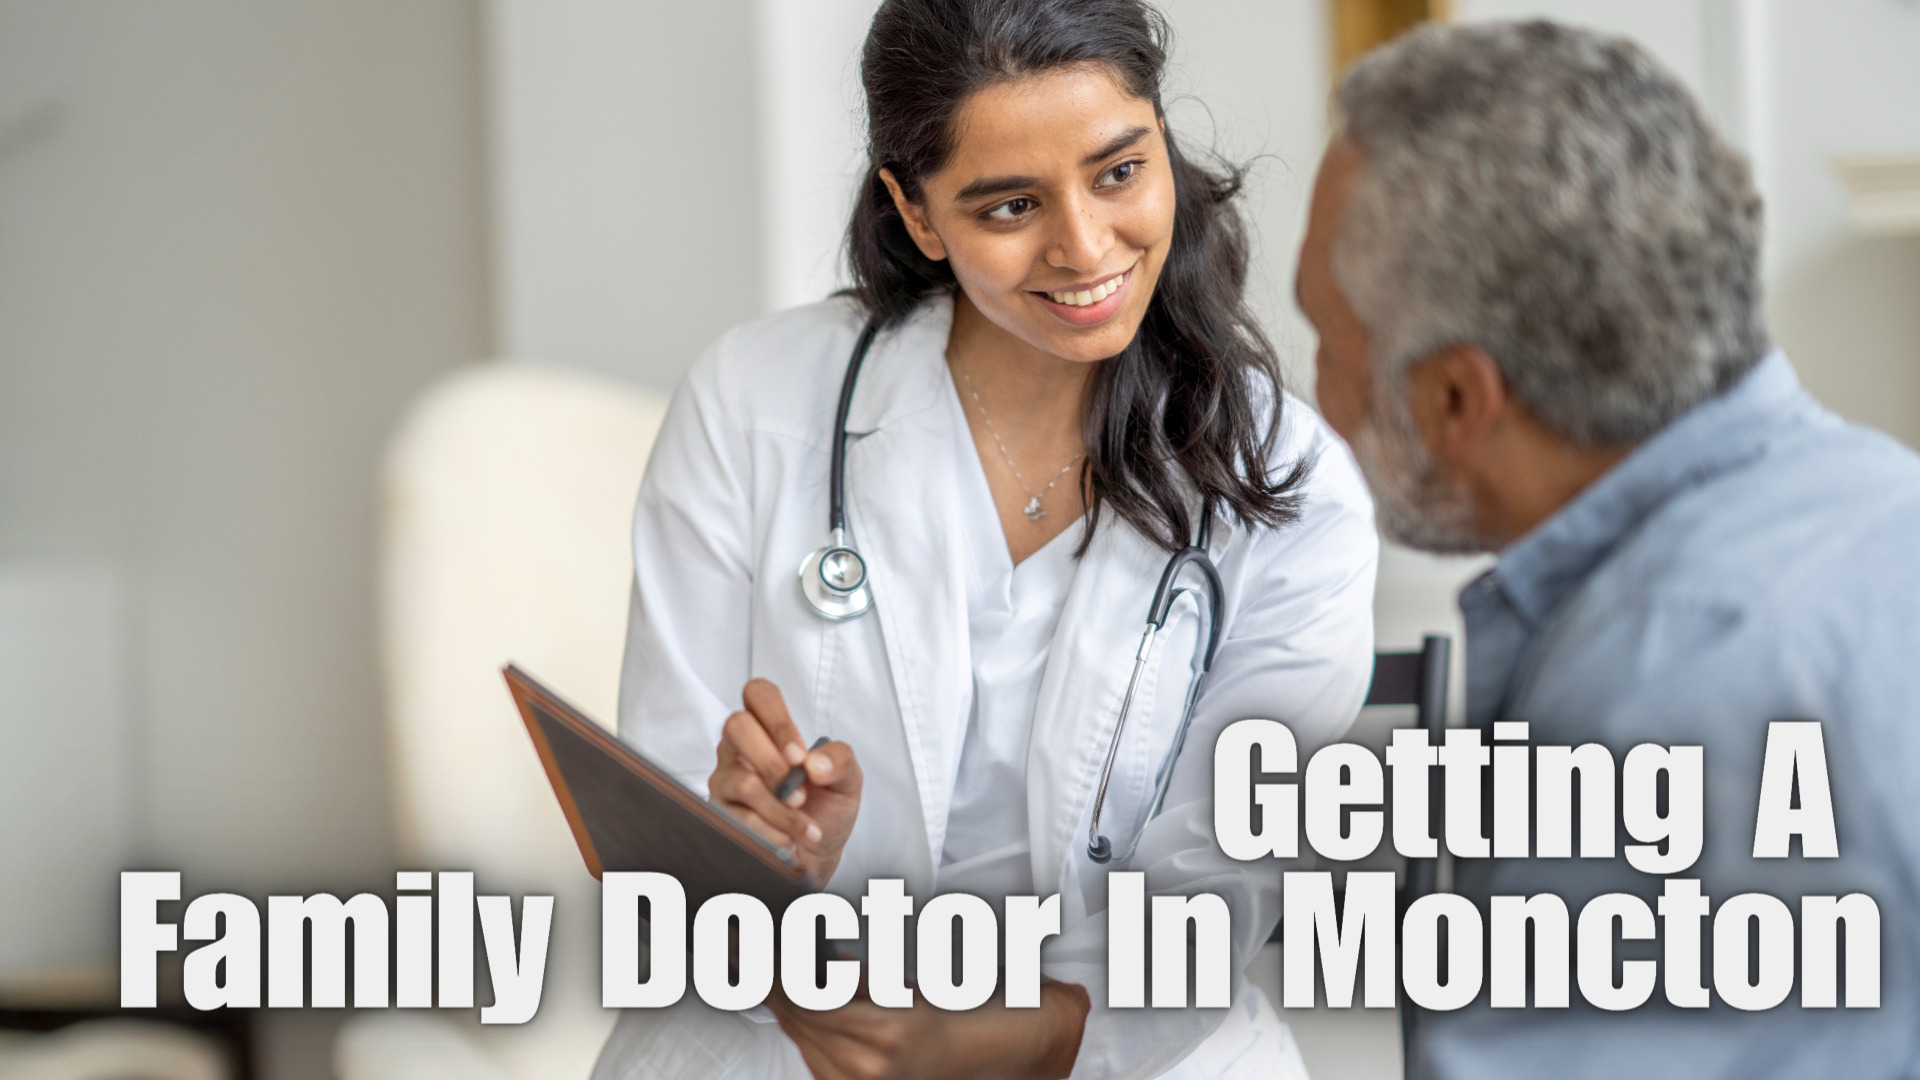 How To Get A Family Doctor in Moncton, New Brunswick